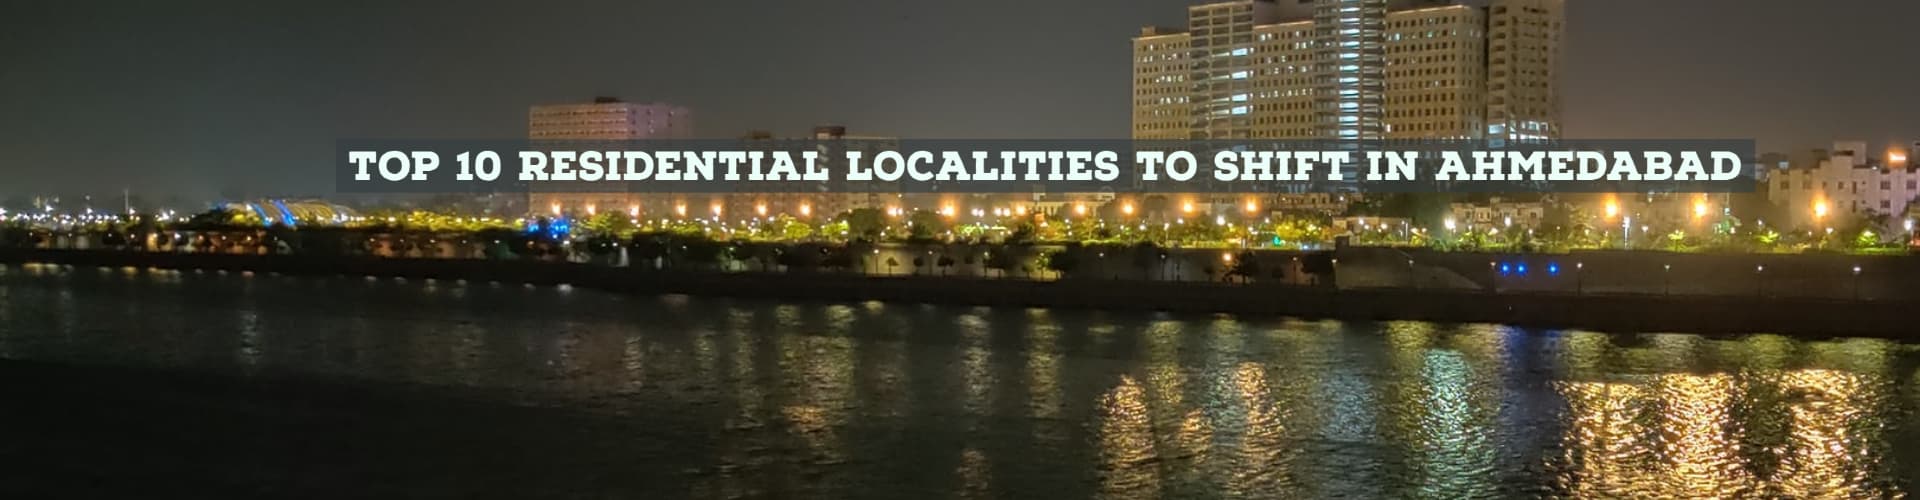 Top 10 Residential Localities to Shift in Ahmedabad